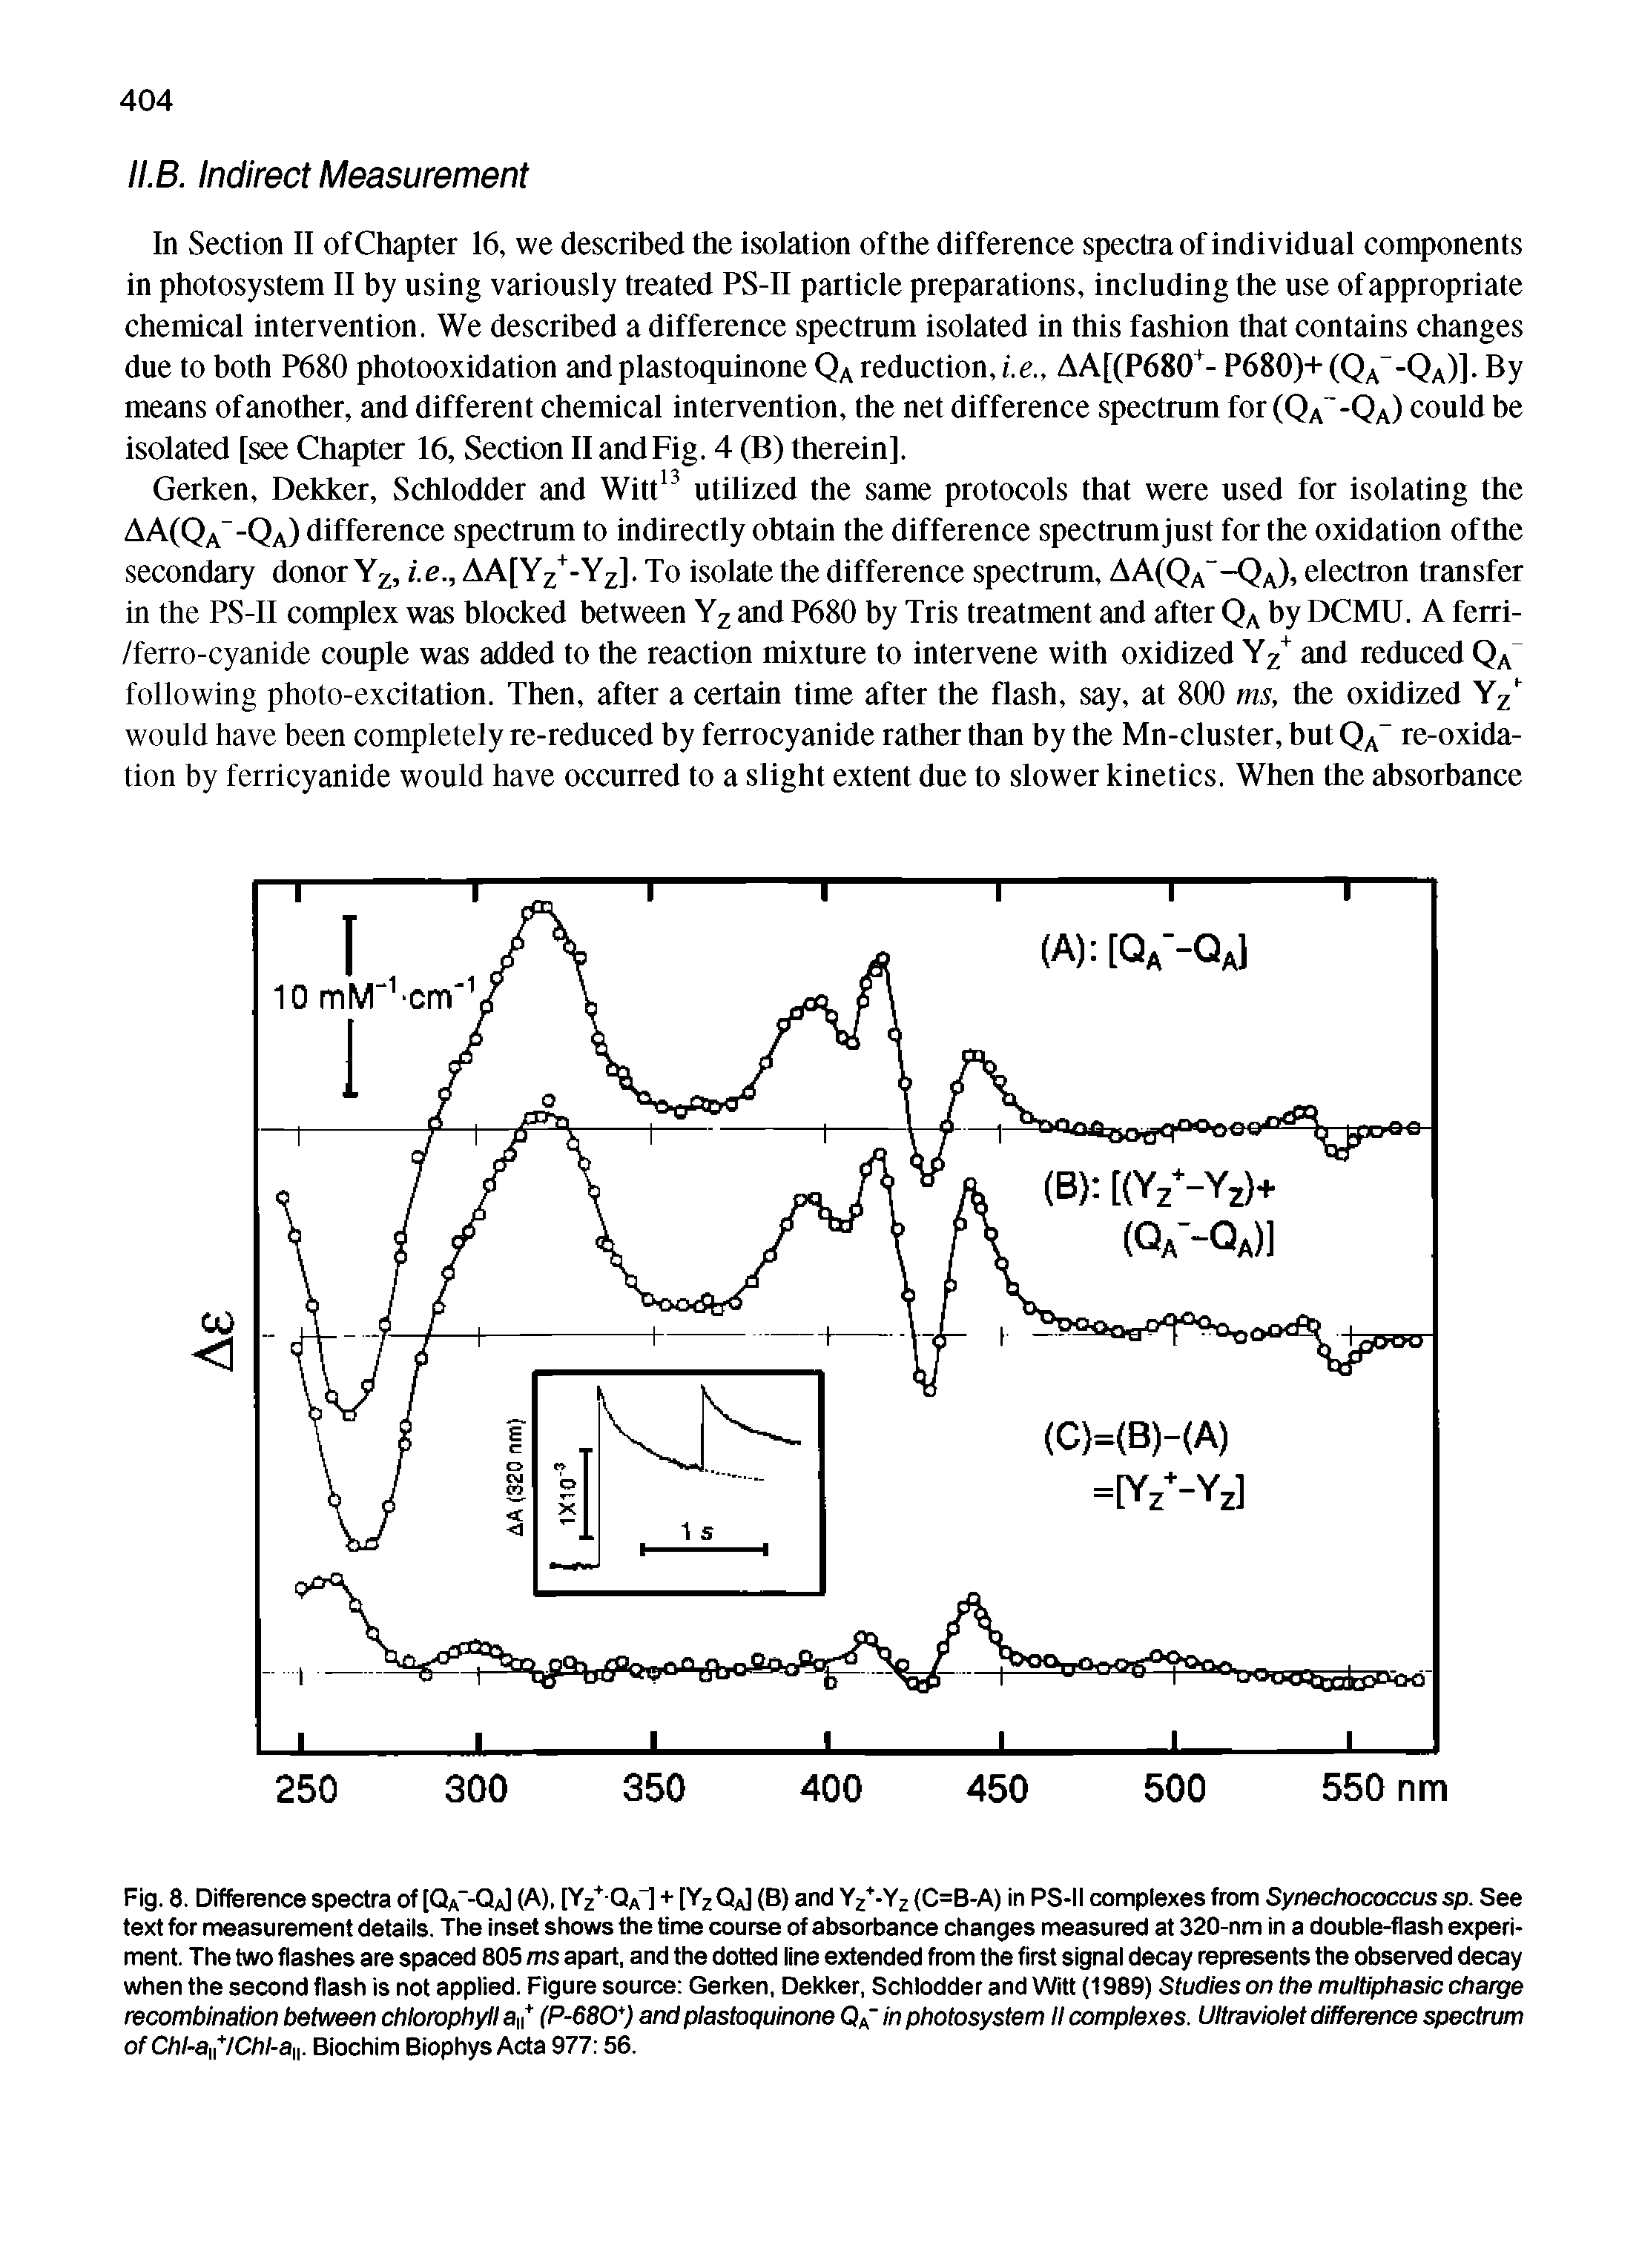 Fig. 8. Difference spectra of [Qa"-Qa1 (A), [Yz QaI + [Yz QaI (B) and Yz -Yz (C=B-A) in PS-ii complexes from Synechococcus sp. See text for measurement details. The inset shows the time course of absorbance changes measured at 320-nm in a double-flash experiment. The two flashes are spaced 805 ms apart, and the dotted line extended from the first signal decay represents the observed decay when the second flash is not applied. Figure source Gerken, Dekker, Schlodder and Witt (1989) Studies on the multiphasic charge recombination between chlorophyll 3 (P-680 ) and plastoquinone Qa" in photosystem II complexes. Ultraviolet difference spectrum of Chl-anlChl-a. Biochim Biophys Acta 977 56.